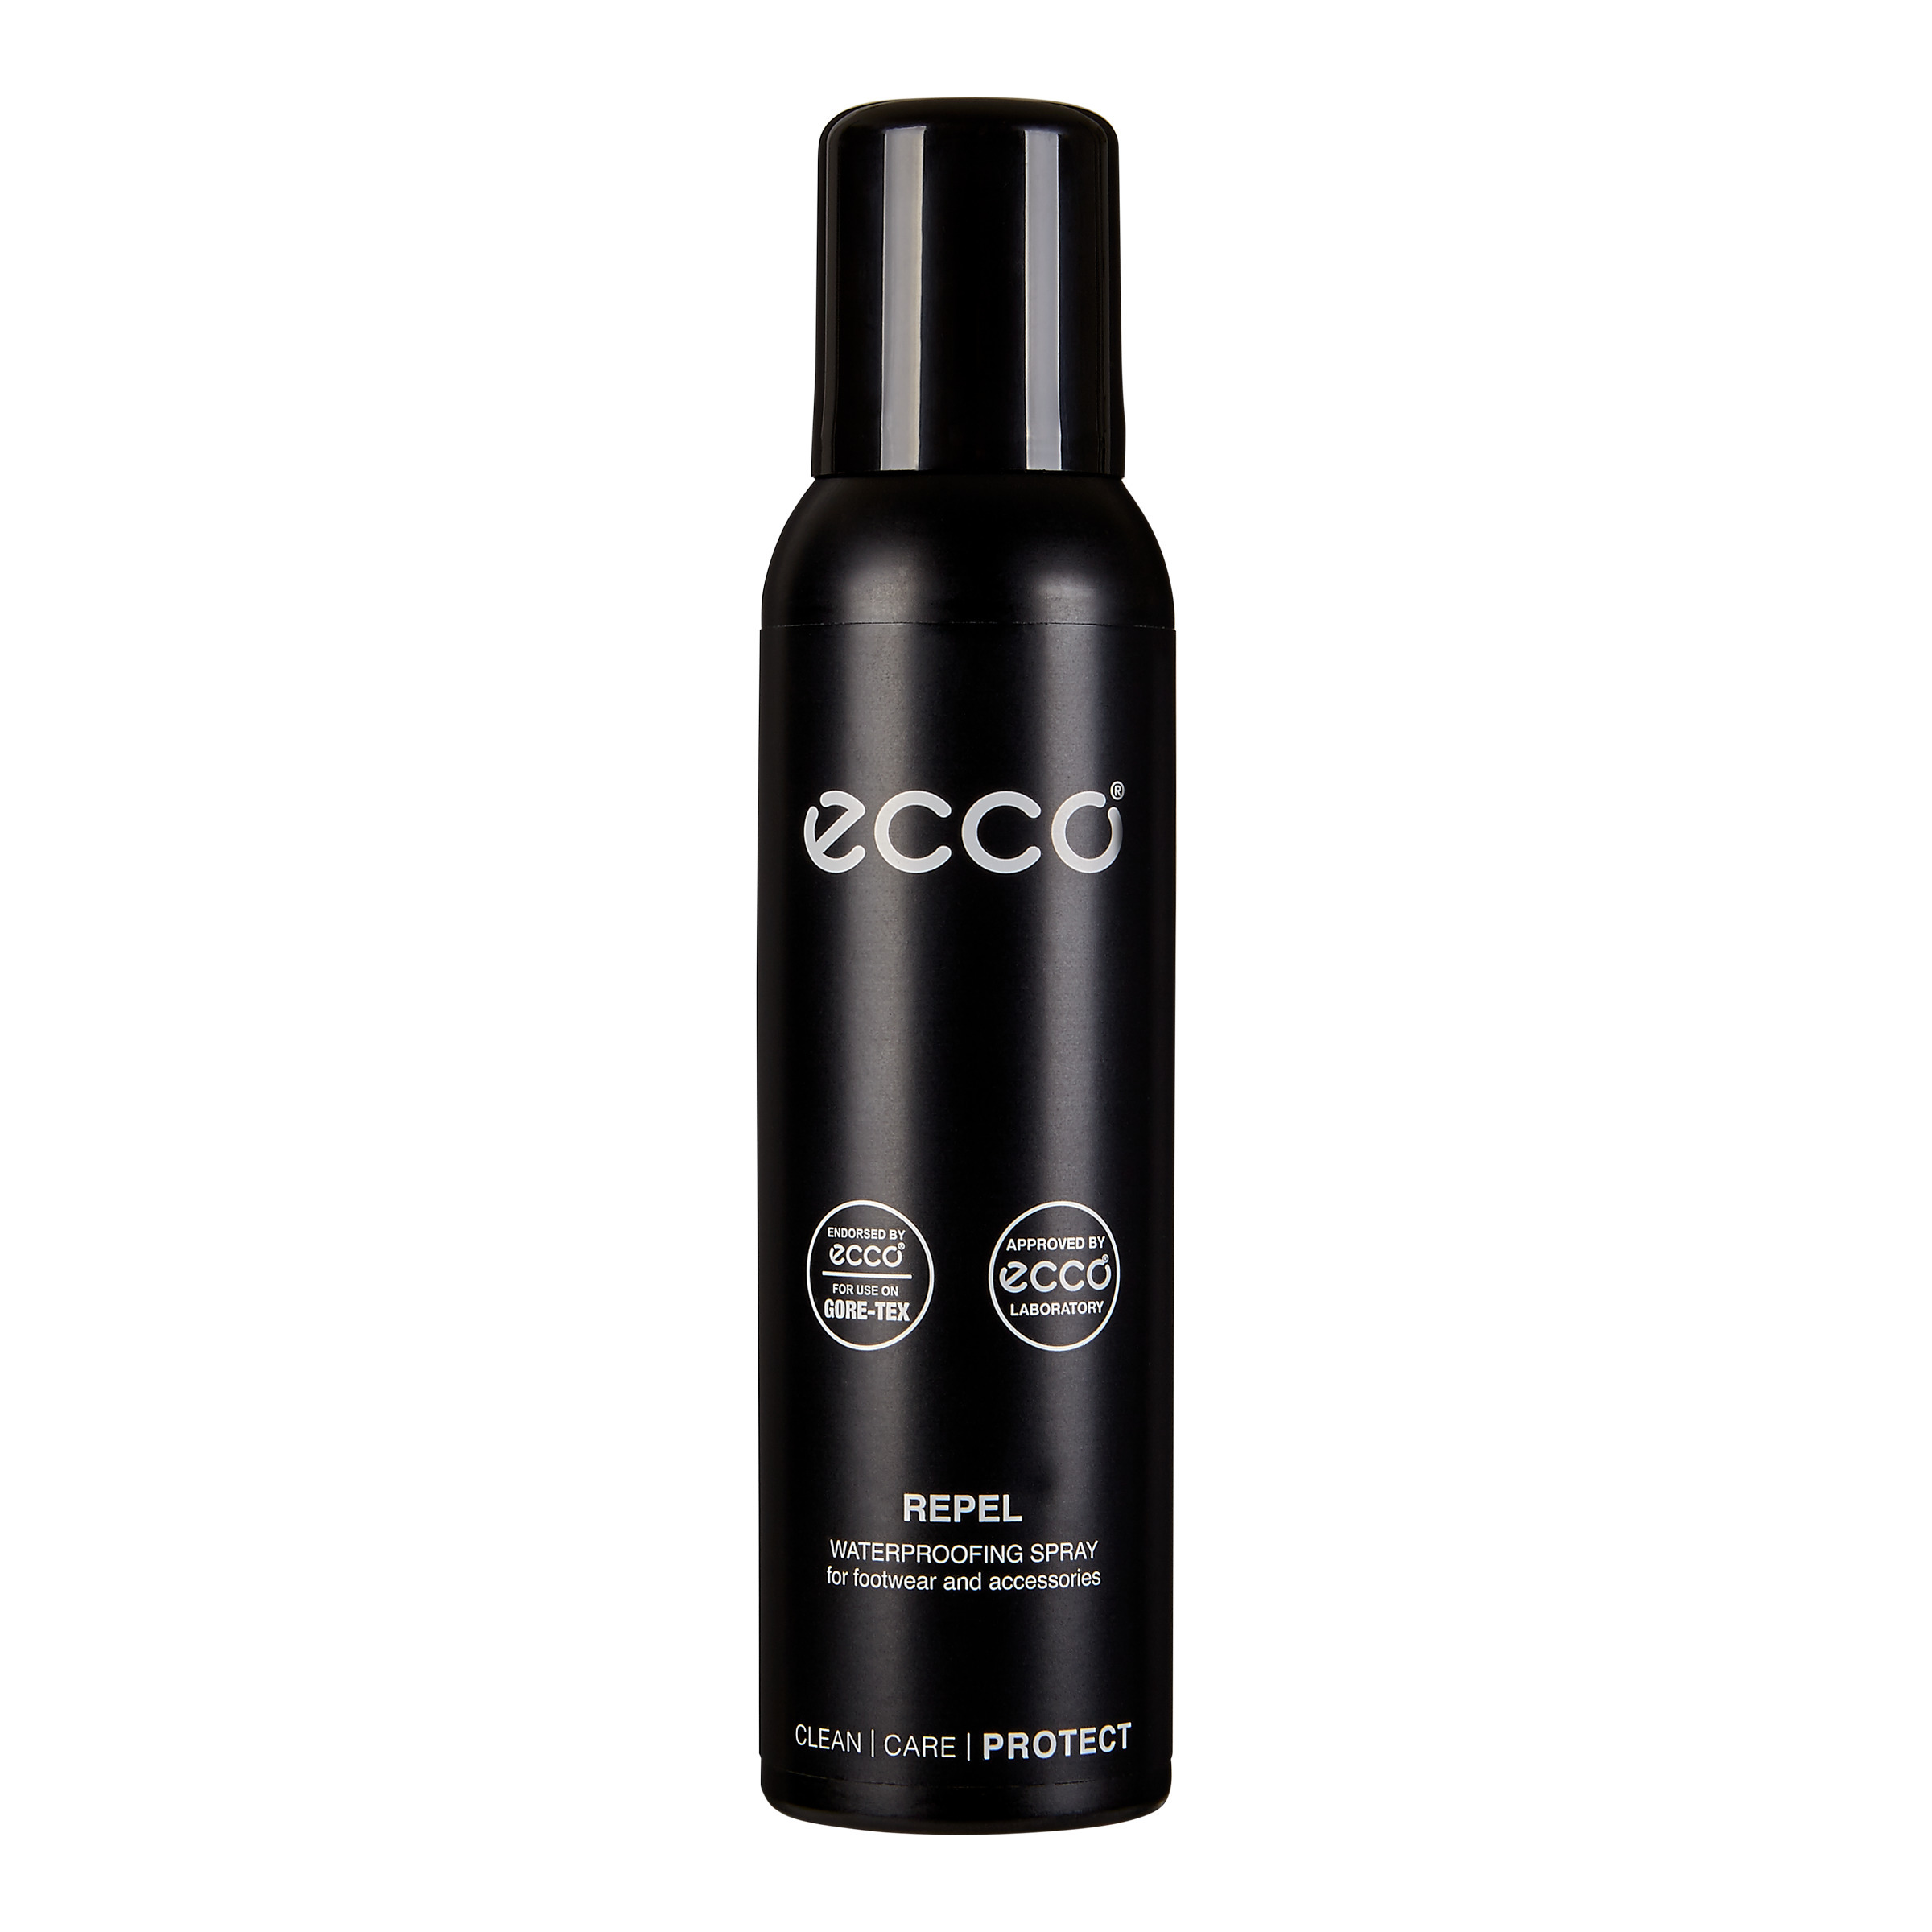 ecco care products